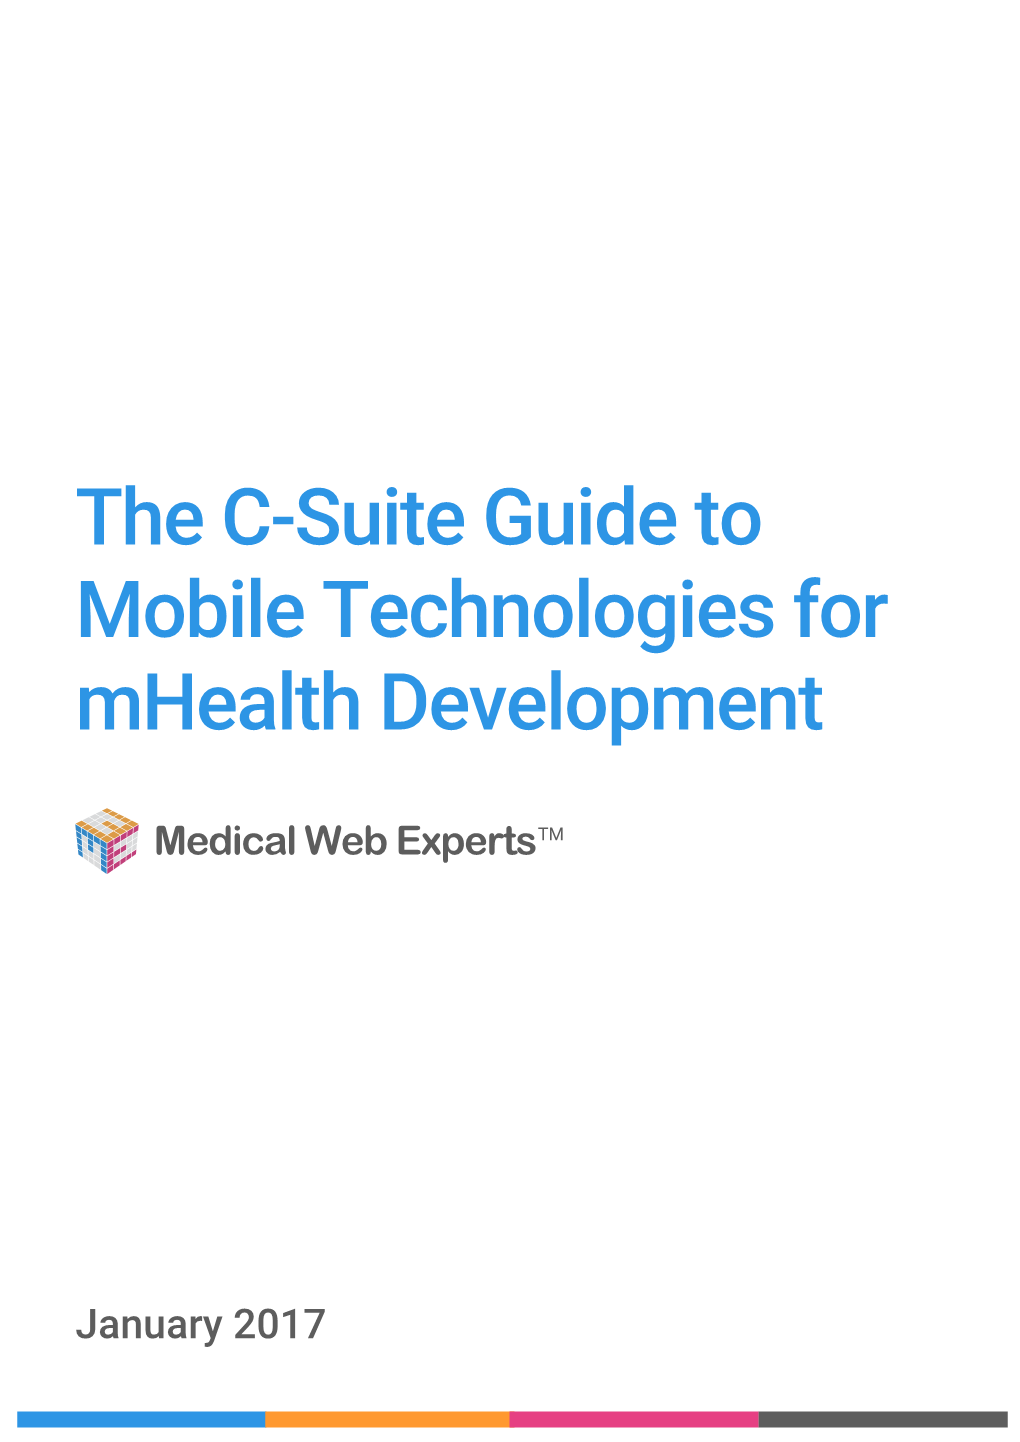 The C-Suite Guide to Mobile Technologies for Mhealth Development